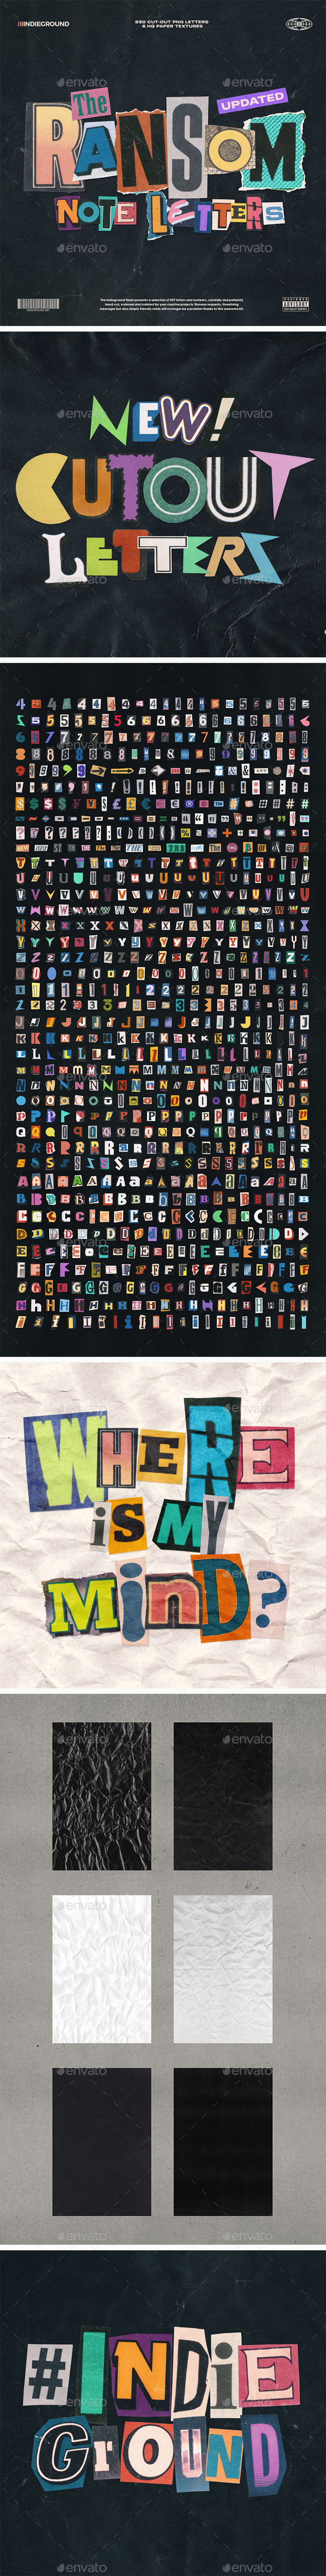 [DOWNLOAD]Ransom Note Letters